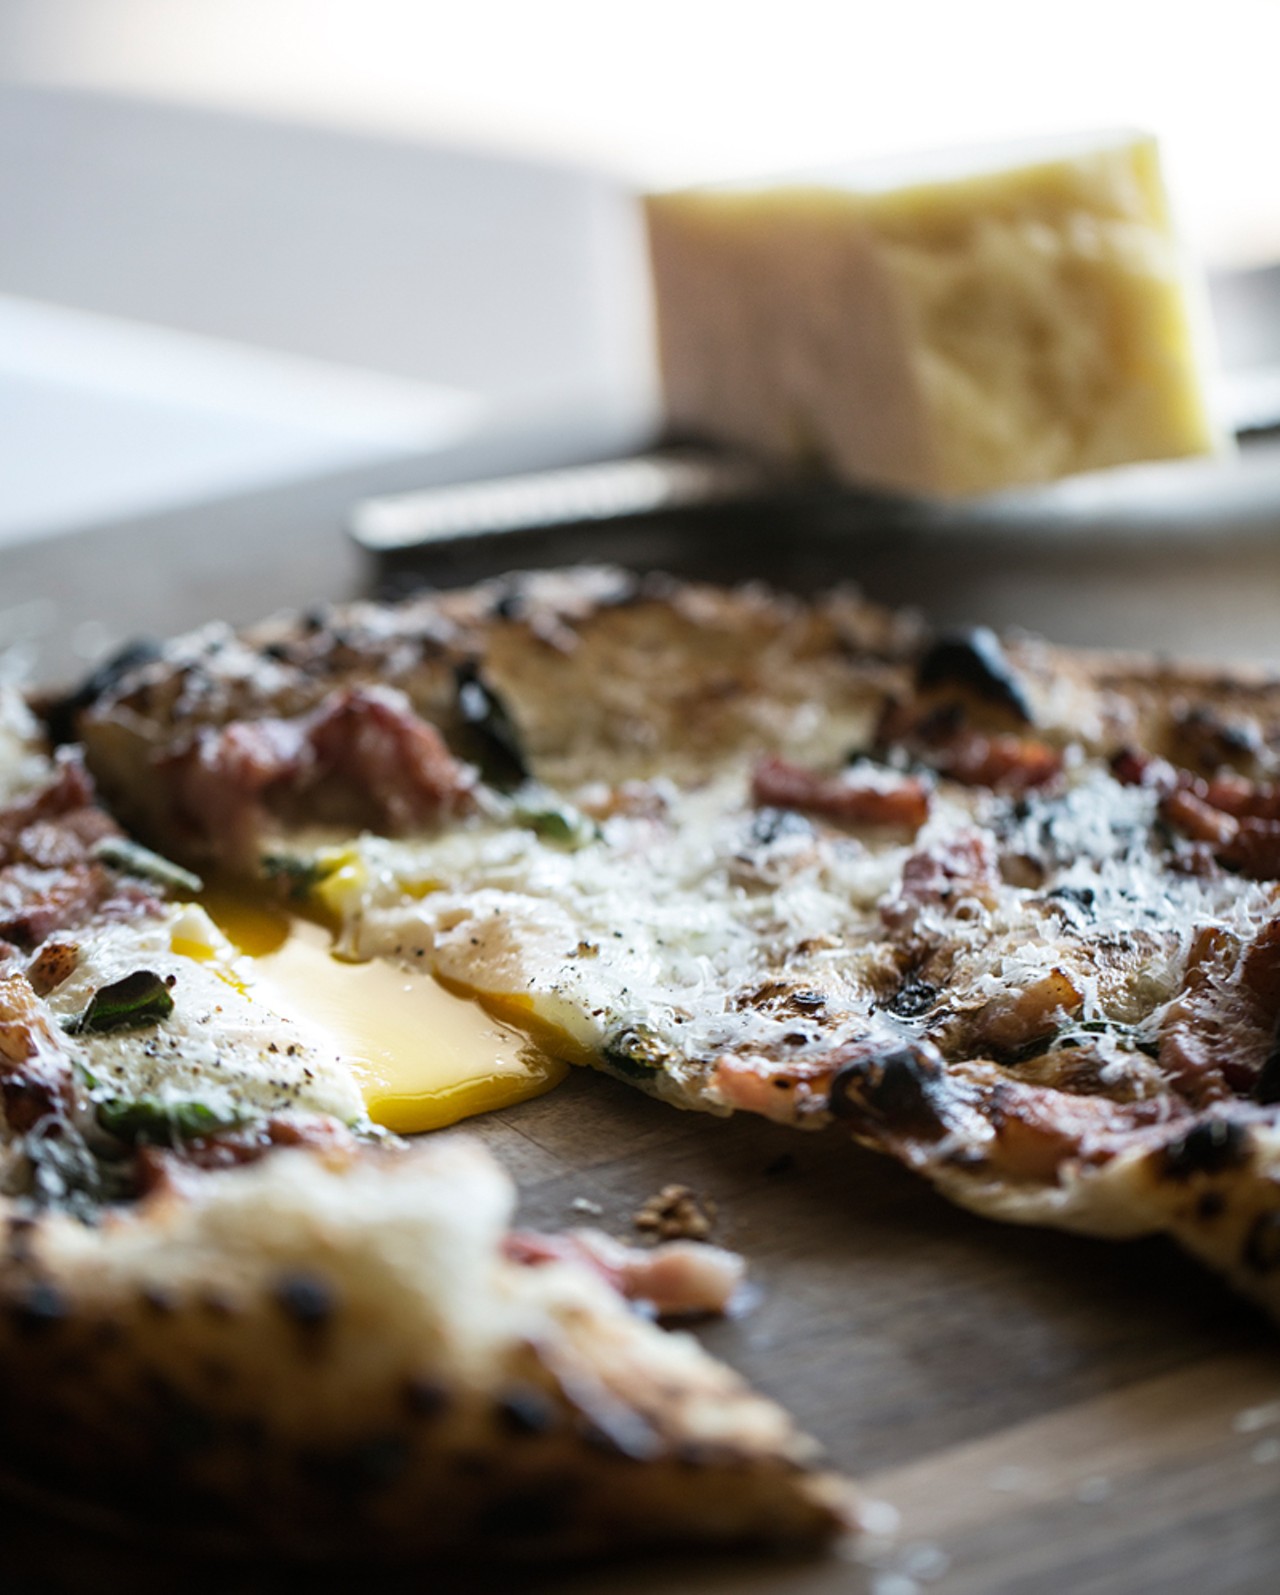 The Good Pie's "Mastunicola Pizza," topped with egg, cured pork belly, parmigiano and sage.